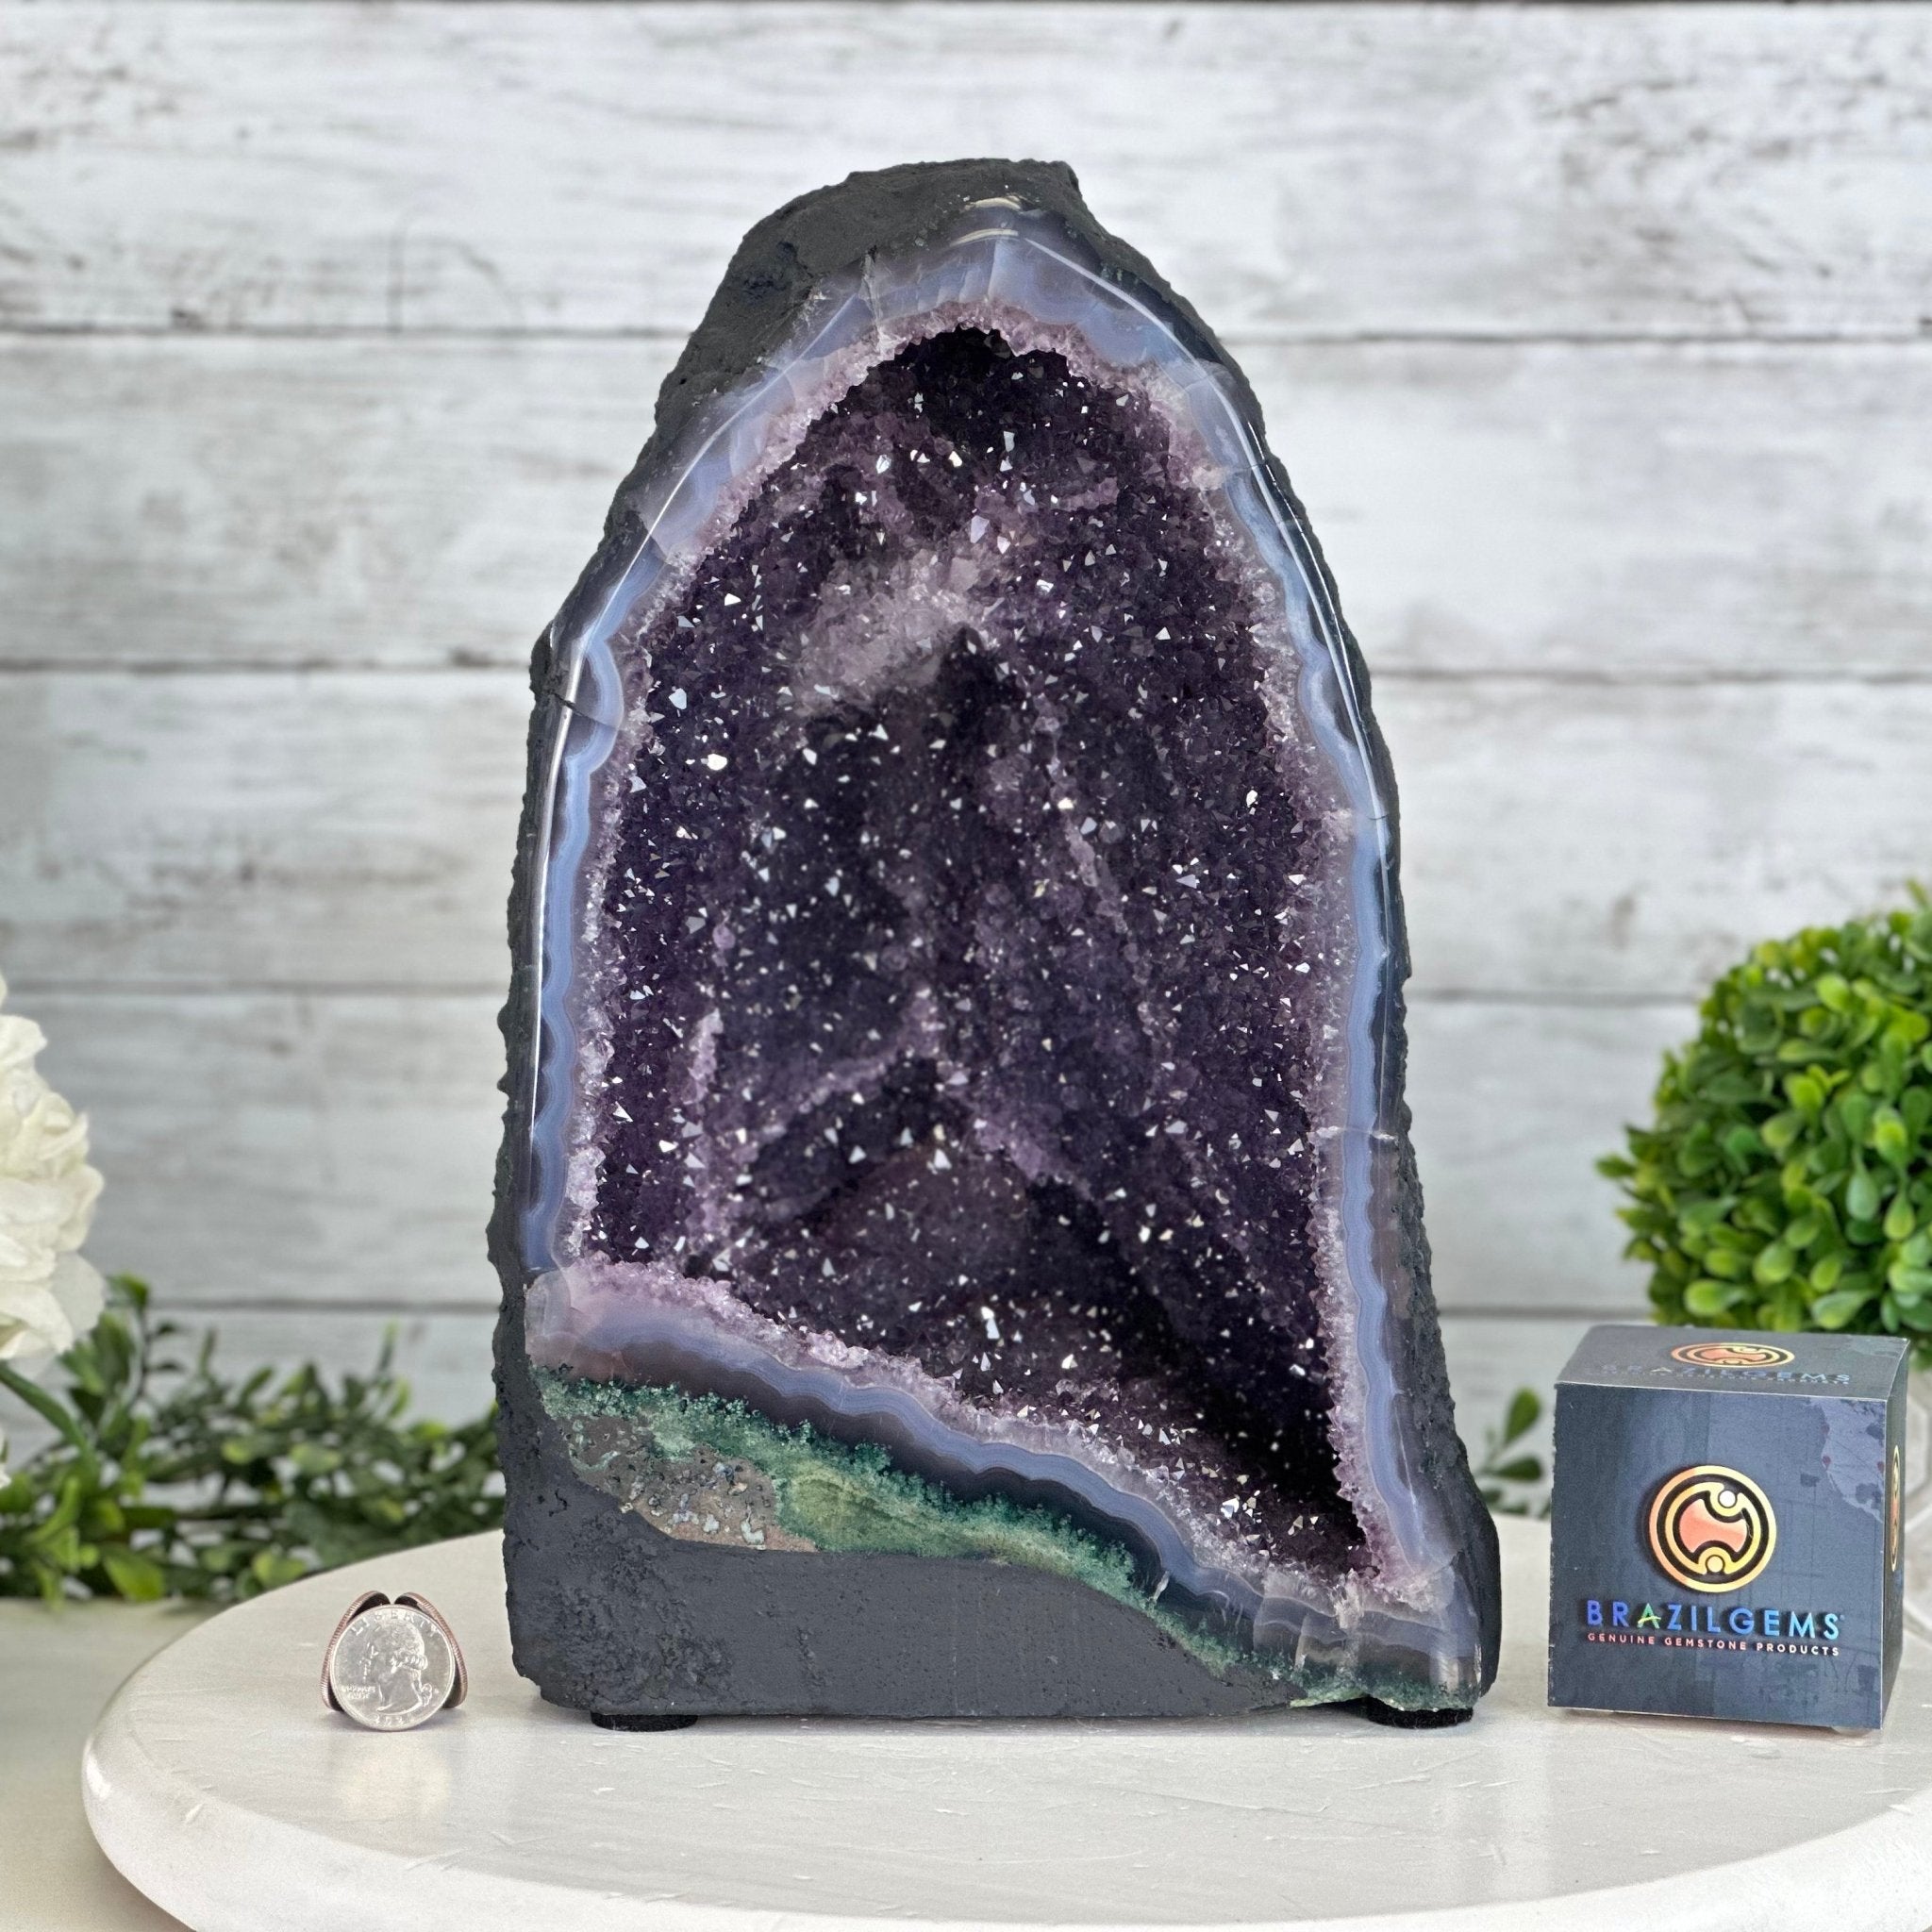 Quality Brazilian Amethyst Cathedral, 15.7 lbs & 12" Tall, #5601 - 1367 - Brazil GemsBrazil GemsQuality Brazilian Amethyst Cathedral, 15.7 lbs & 12" Tall, #5601 - 1367Cathedrals5601 - 1367